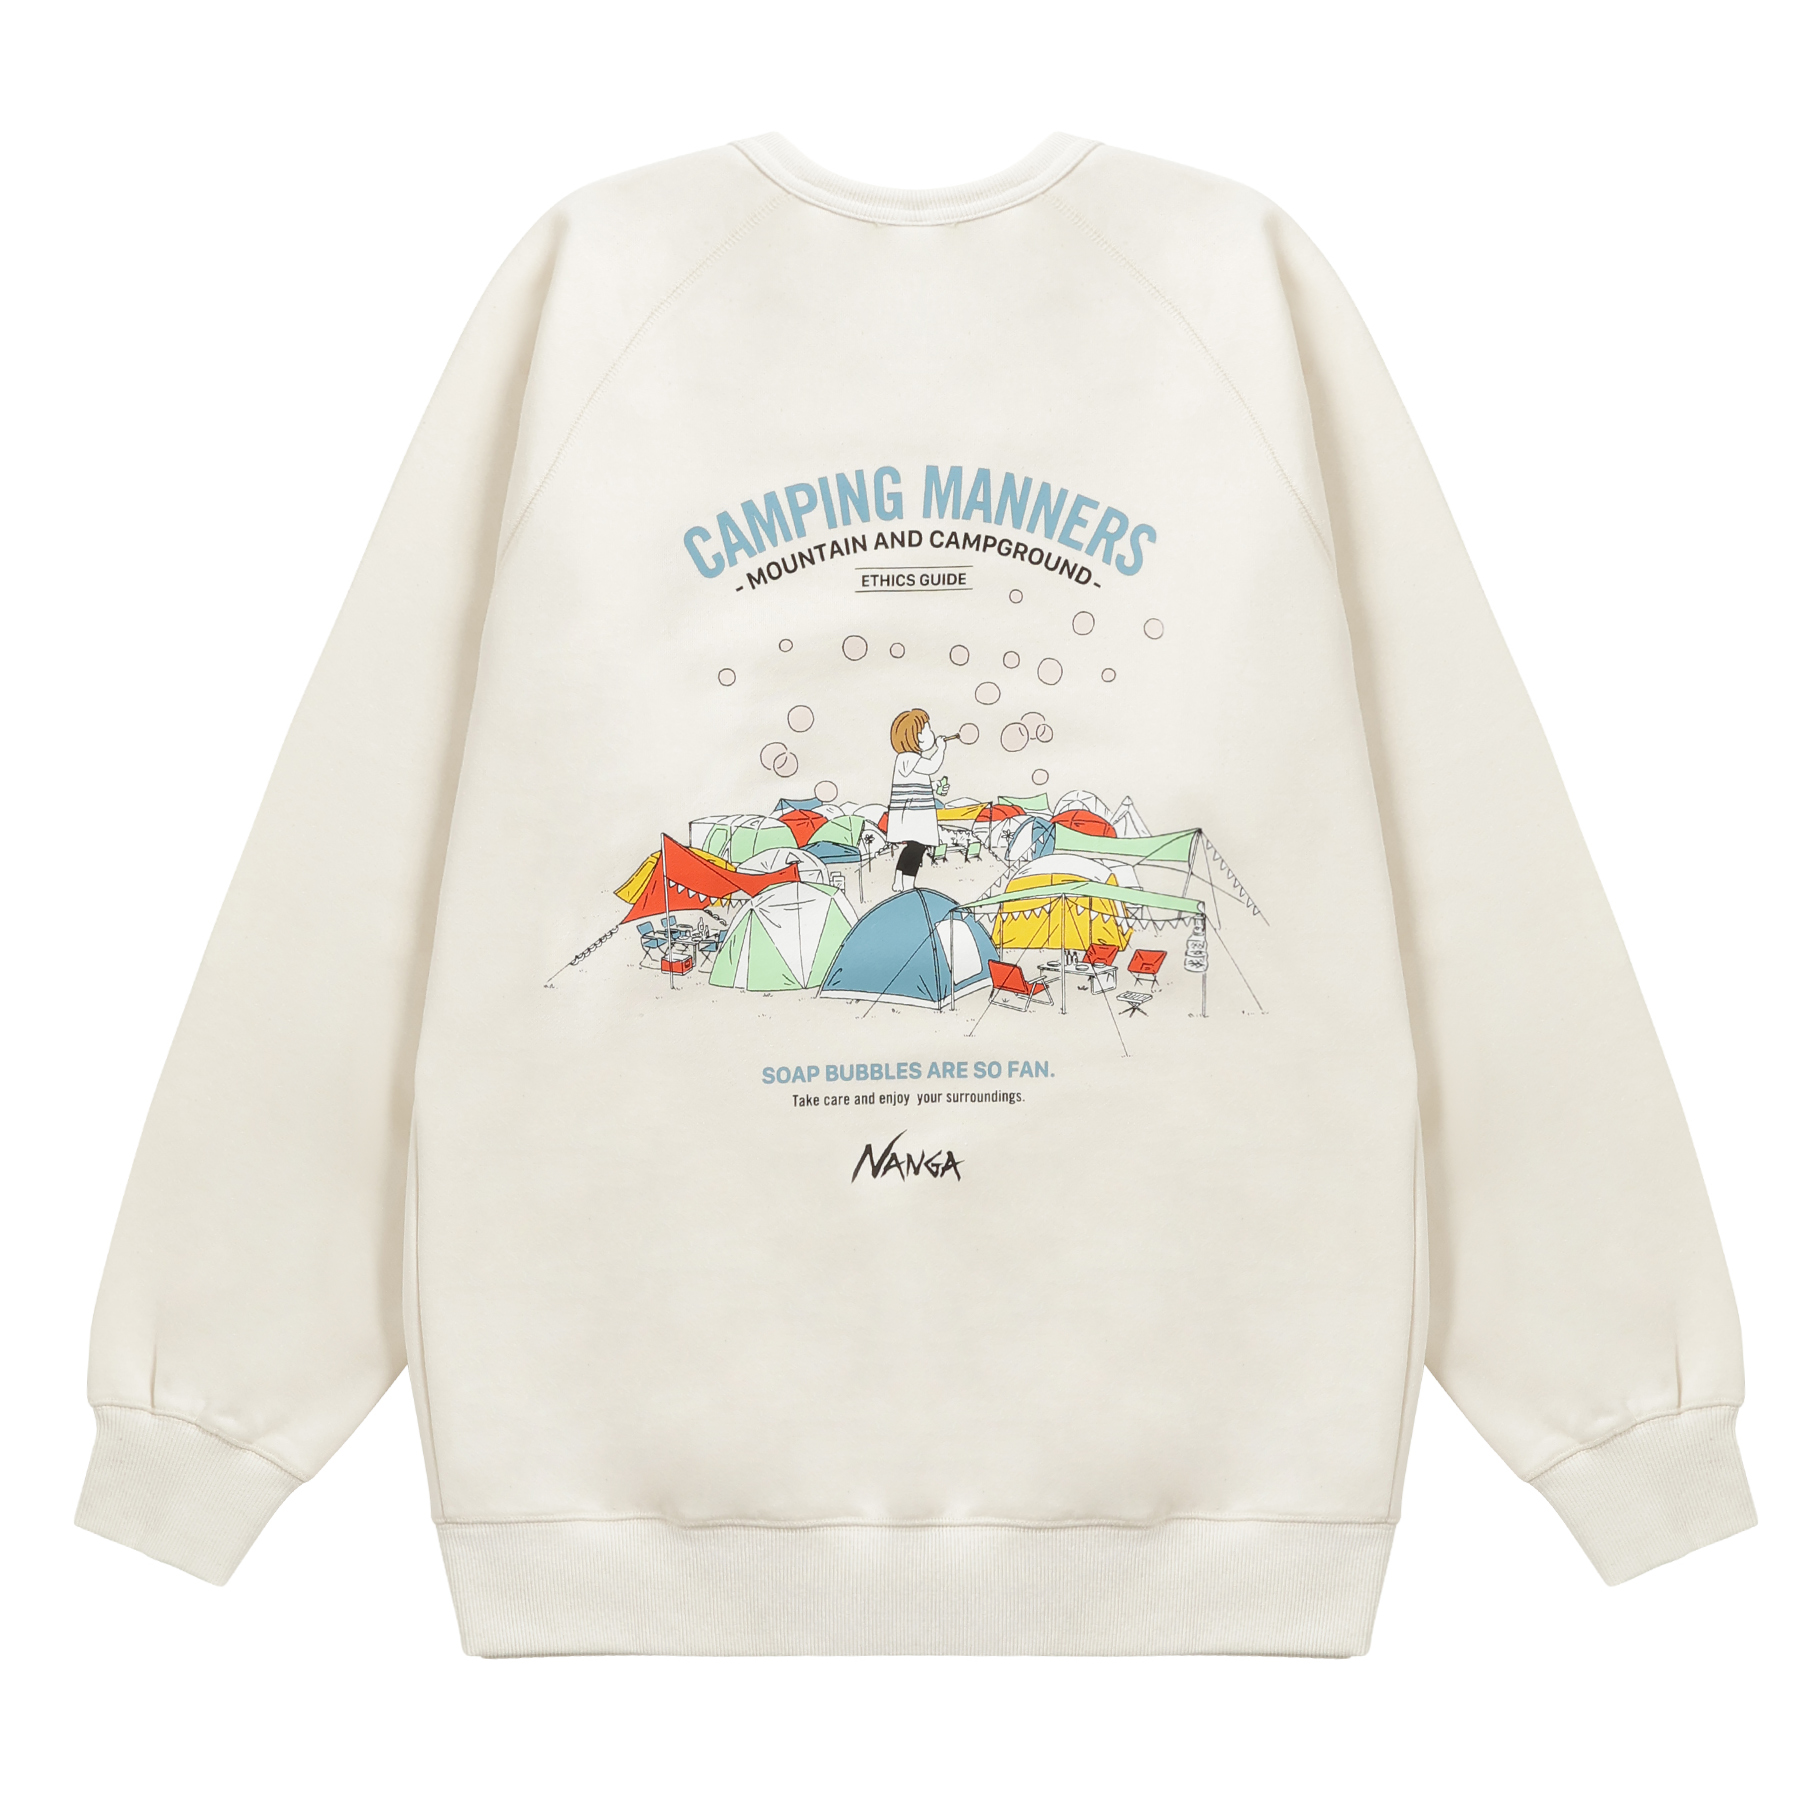 ECO HYBRID CAMPING MANNERS SOAP BUBBLES SWEATSHIRT